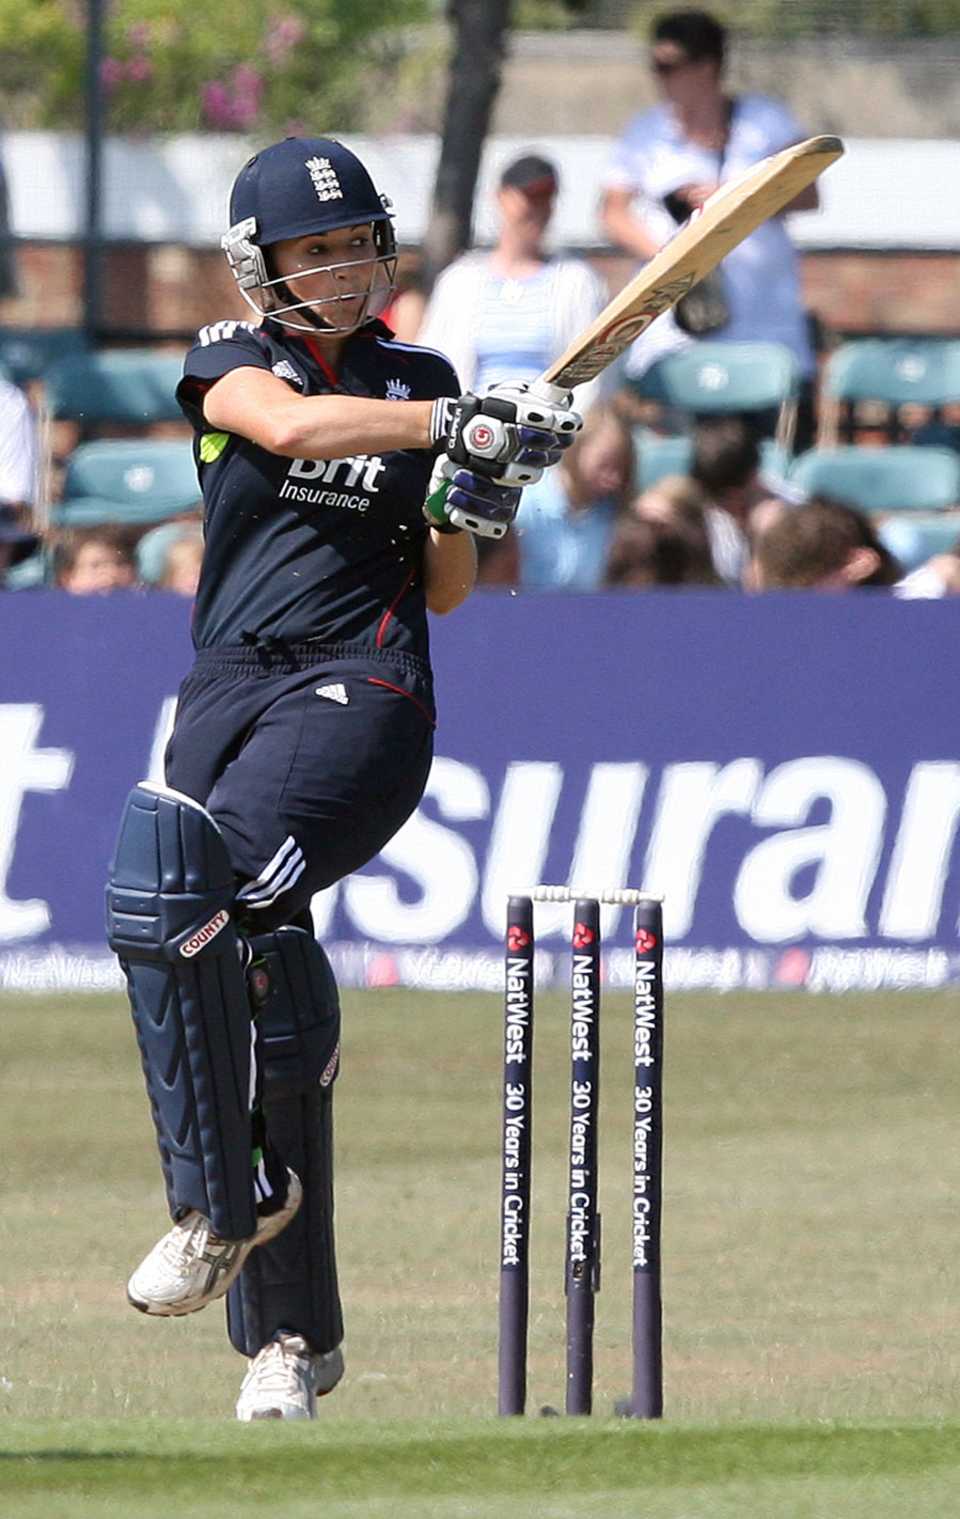 Charlotte Edwards top-scored for England with a run-a-ball 1, England Women v New Zealand Women, 3rd Twenty20, Hove, July 2, 2010